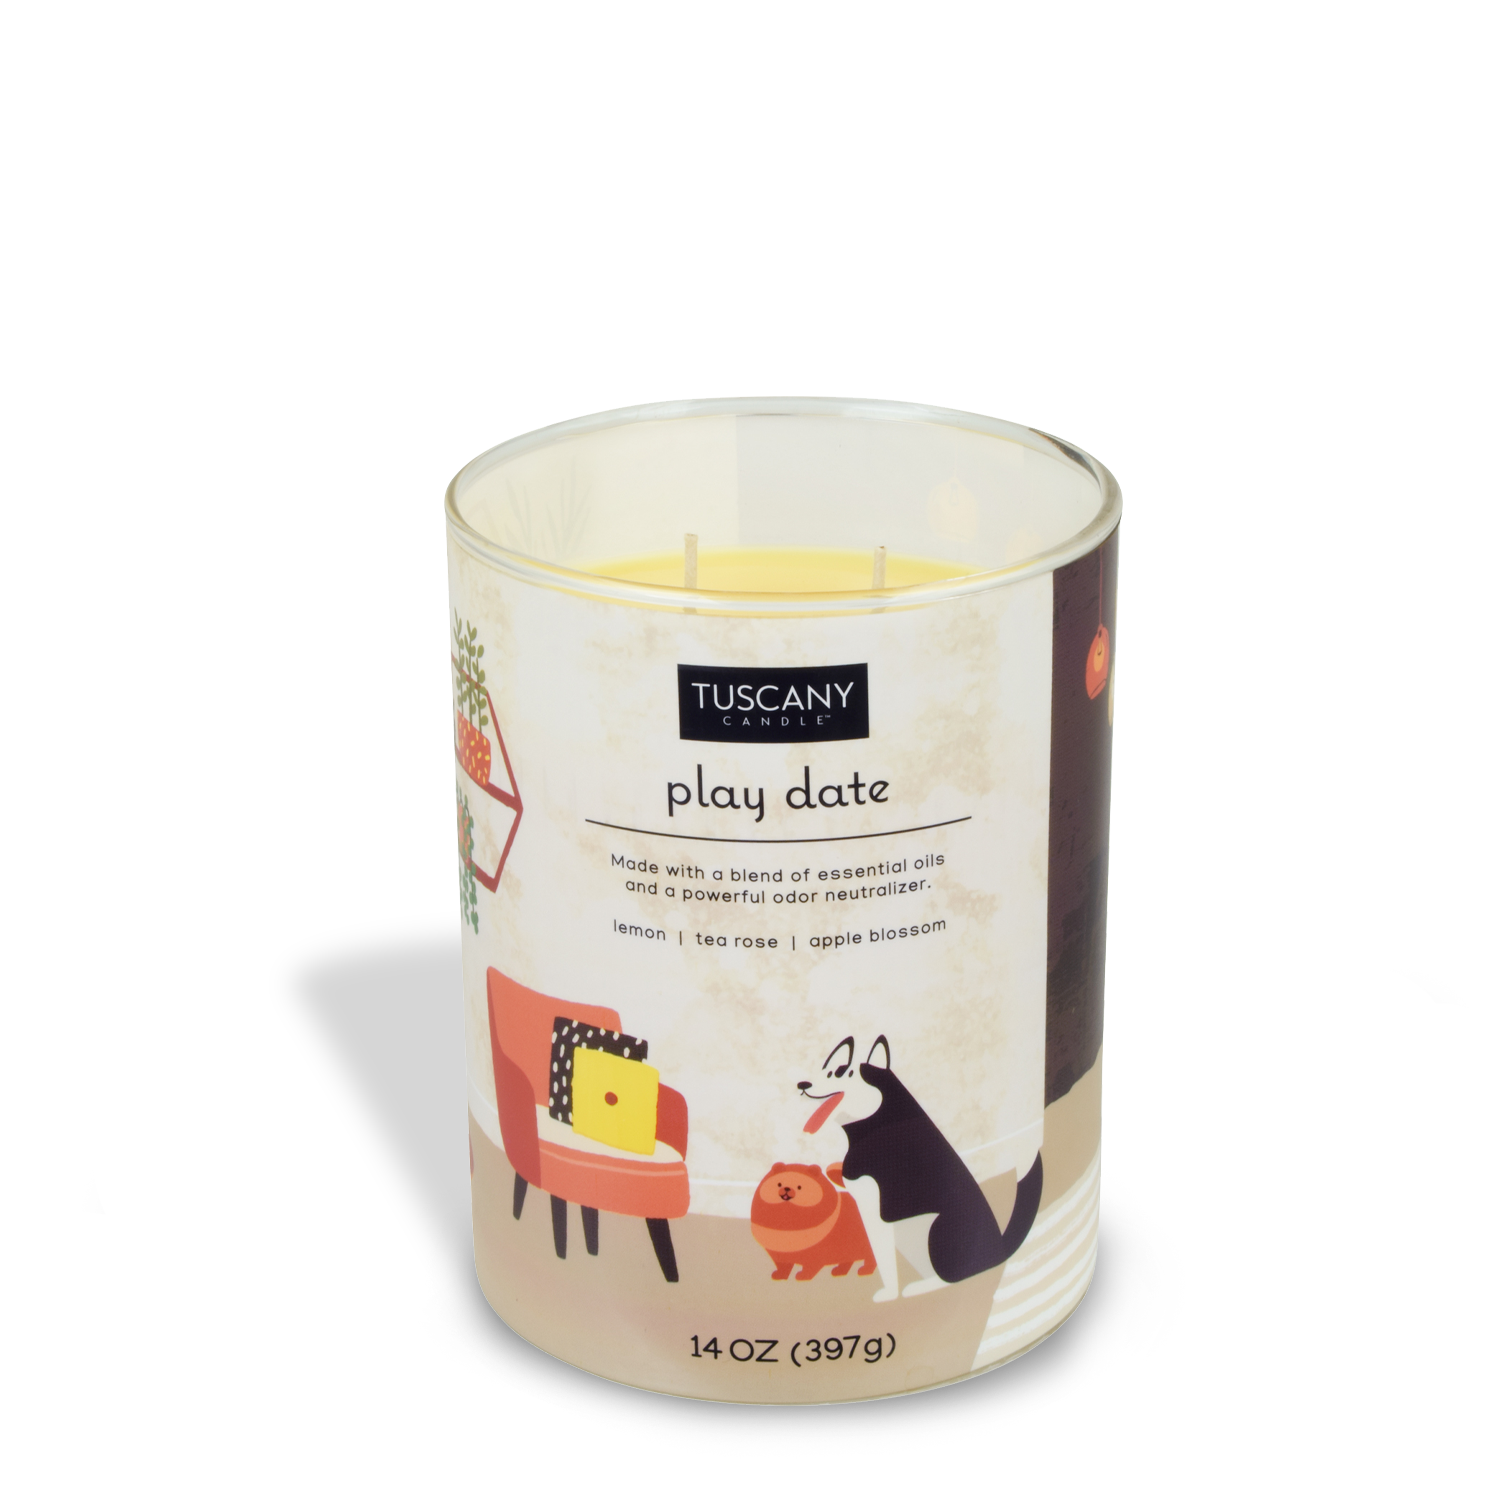 A Tuscany Candle Play Date Scented Jar Candle (14 oz) from their Pet Odor Control Collection with a picture on it is used to neutralize pet odors.